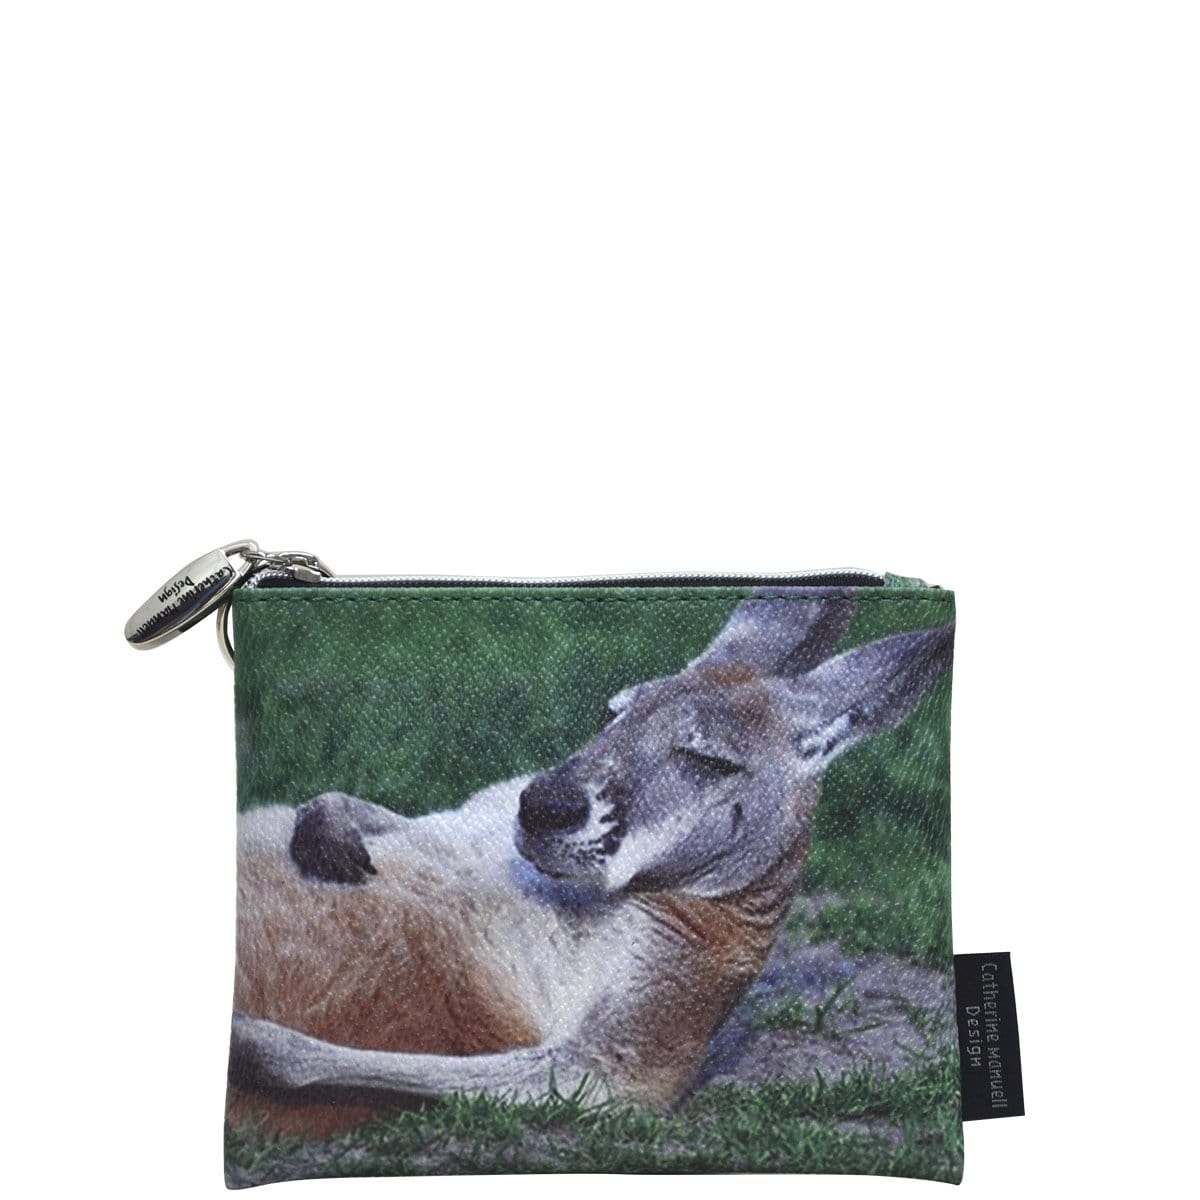 Amazon.com: RooBalls Kangaroo Scrotum Coin Pouch with Key Chain (Medium) :  Home & Kitchen